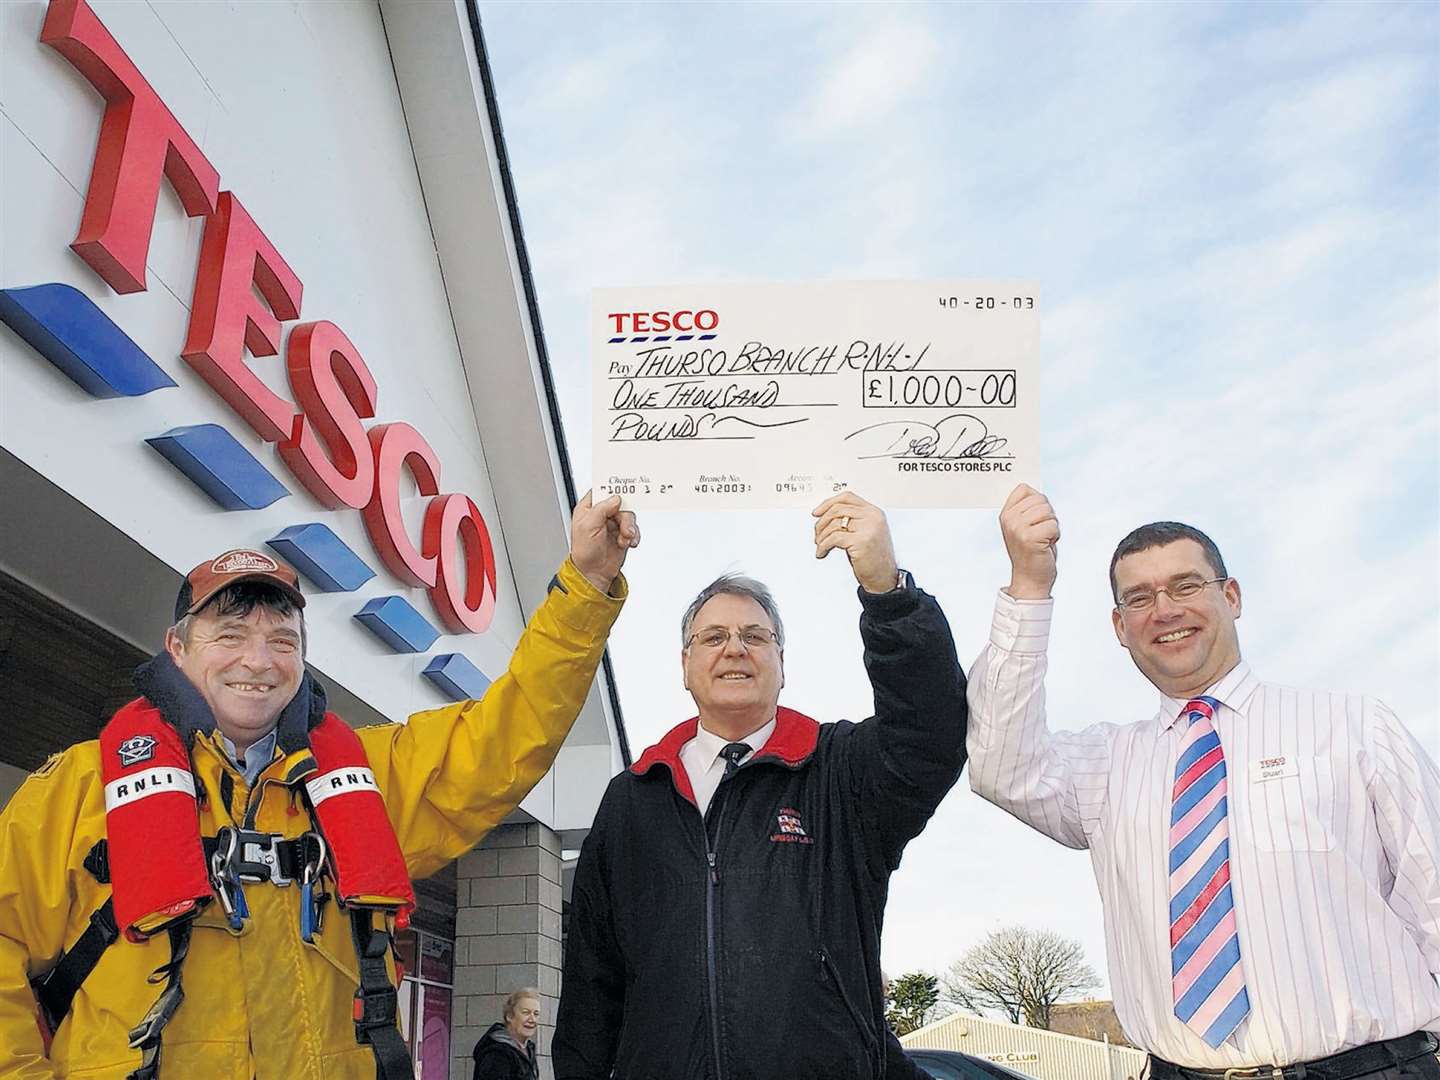 Tesco’s Thurso store manager Stuart Cowan (right) presenting a £1000 cheque to Brian Williams, Thurso lifeboat operations manager, while looking on is coxswain William “Wing” Munro, in 2008.